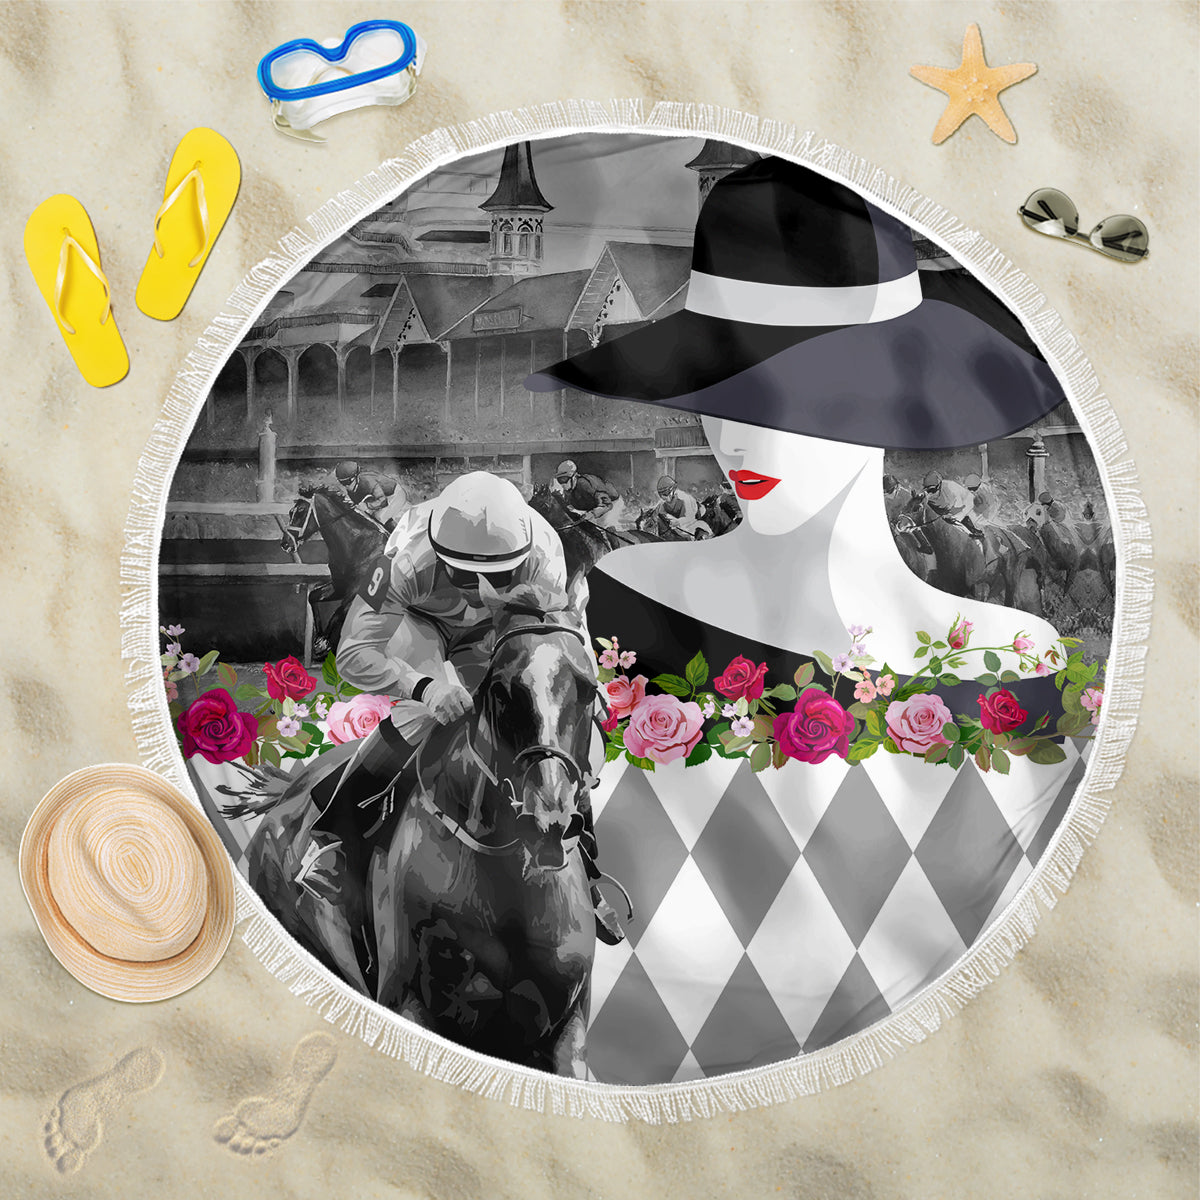 Kentucky Racing Horses Derby Hat Lady Beach Blanket Churchill Downs and Roses Grayscale